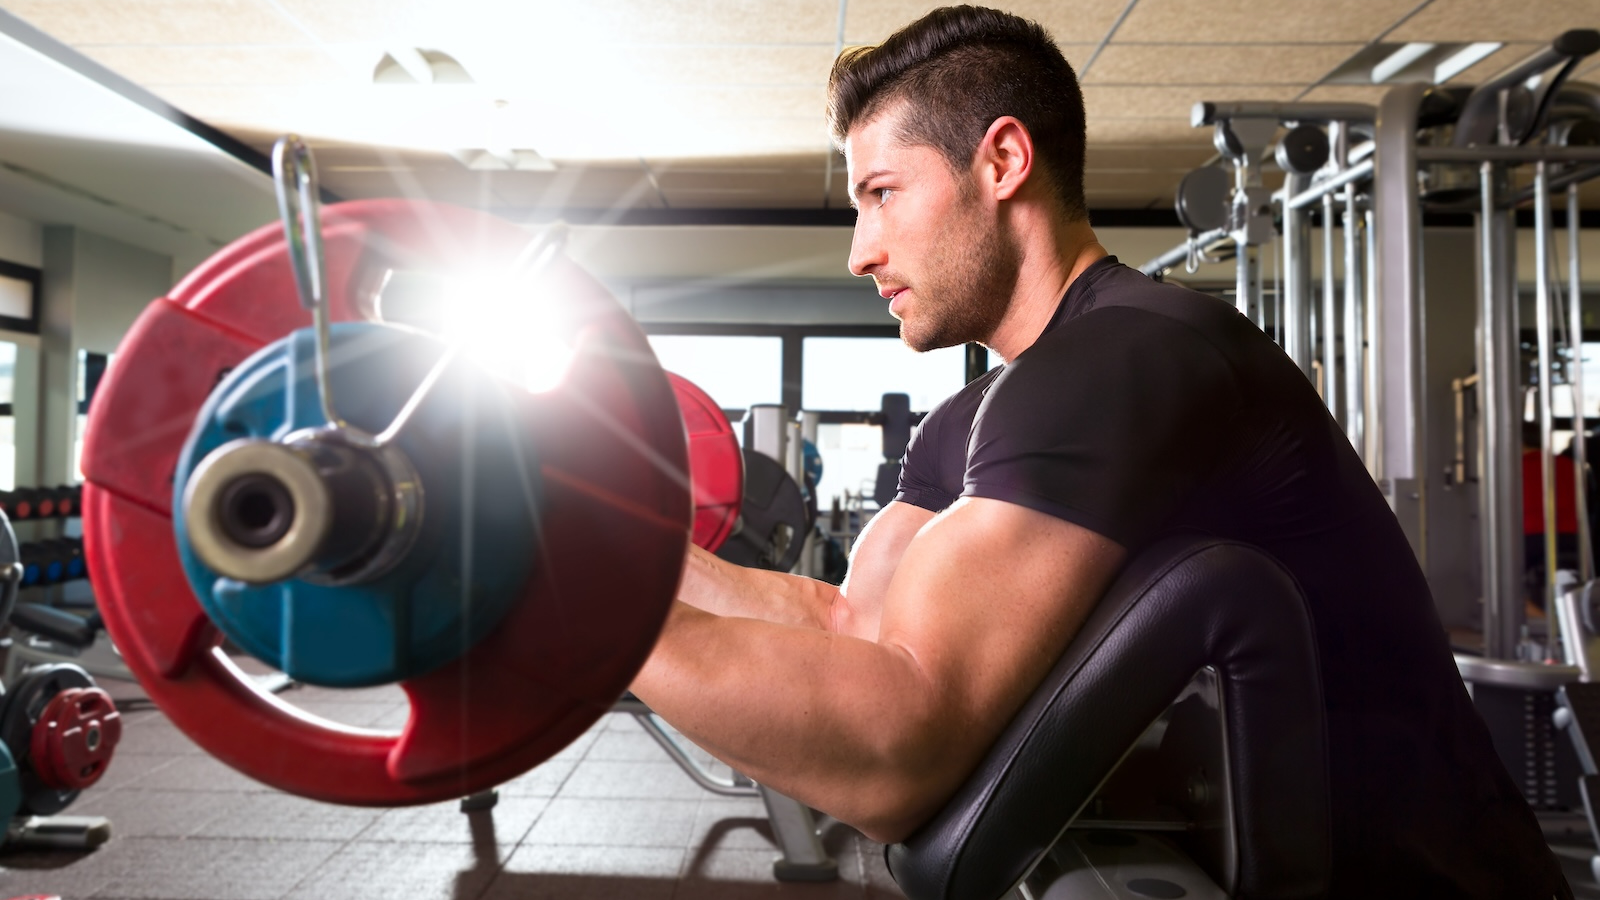 how-to-do-the-preacher-curl-for-building-bigger-biceps-–-breaking-muscle